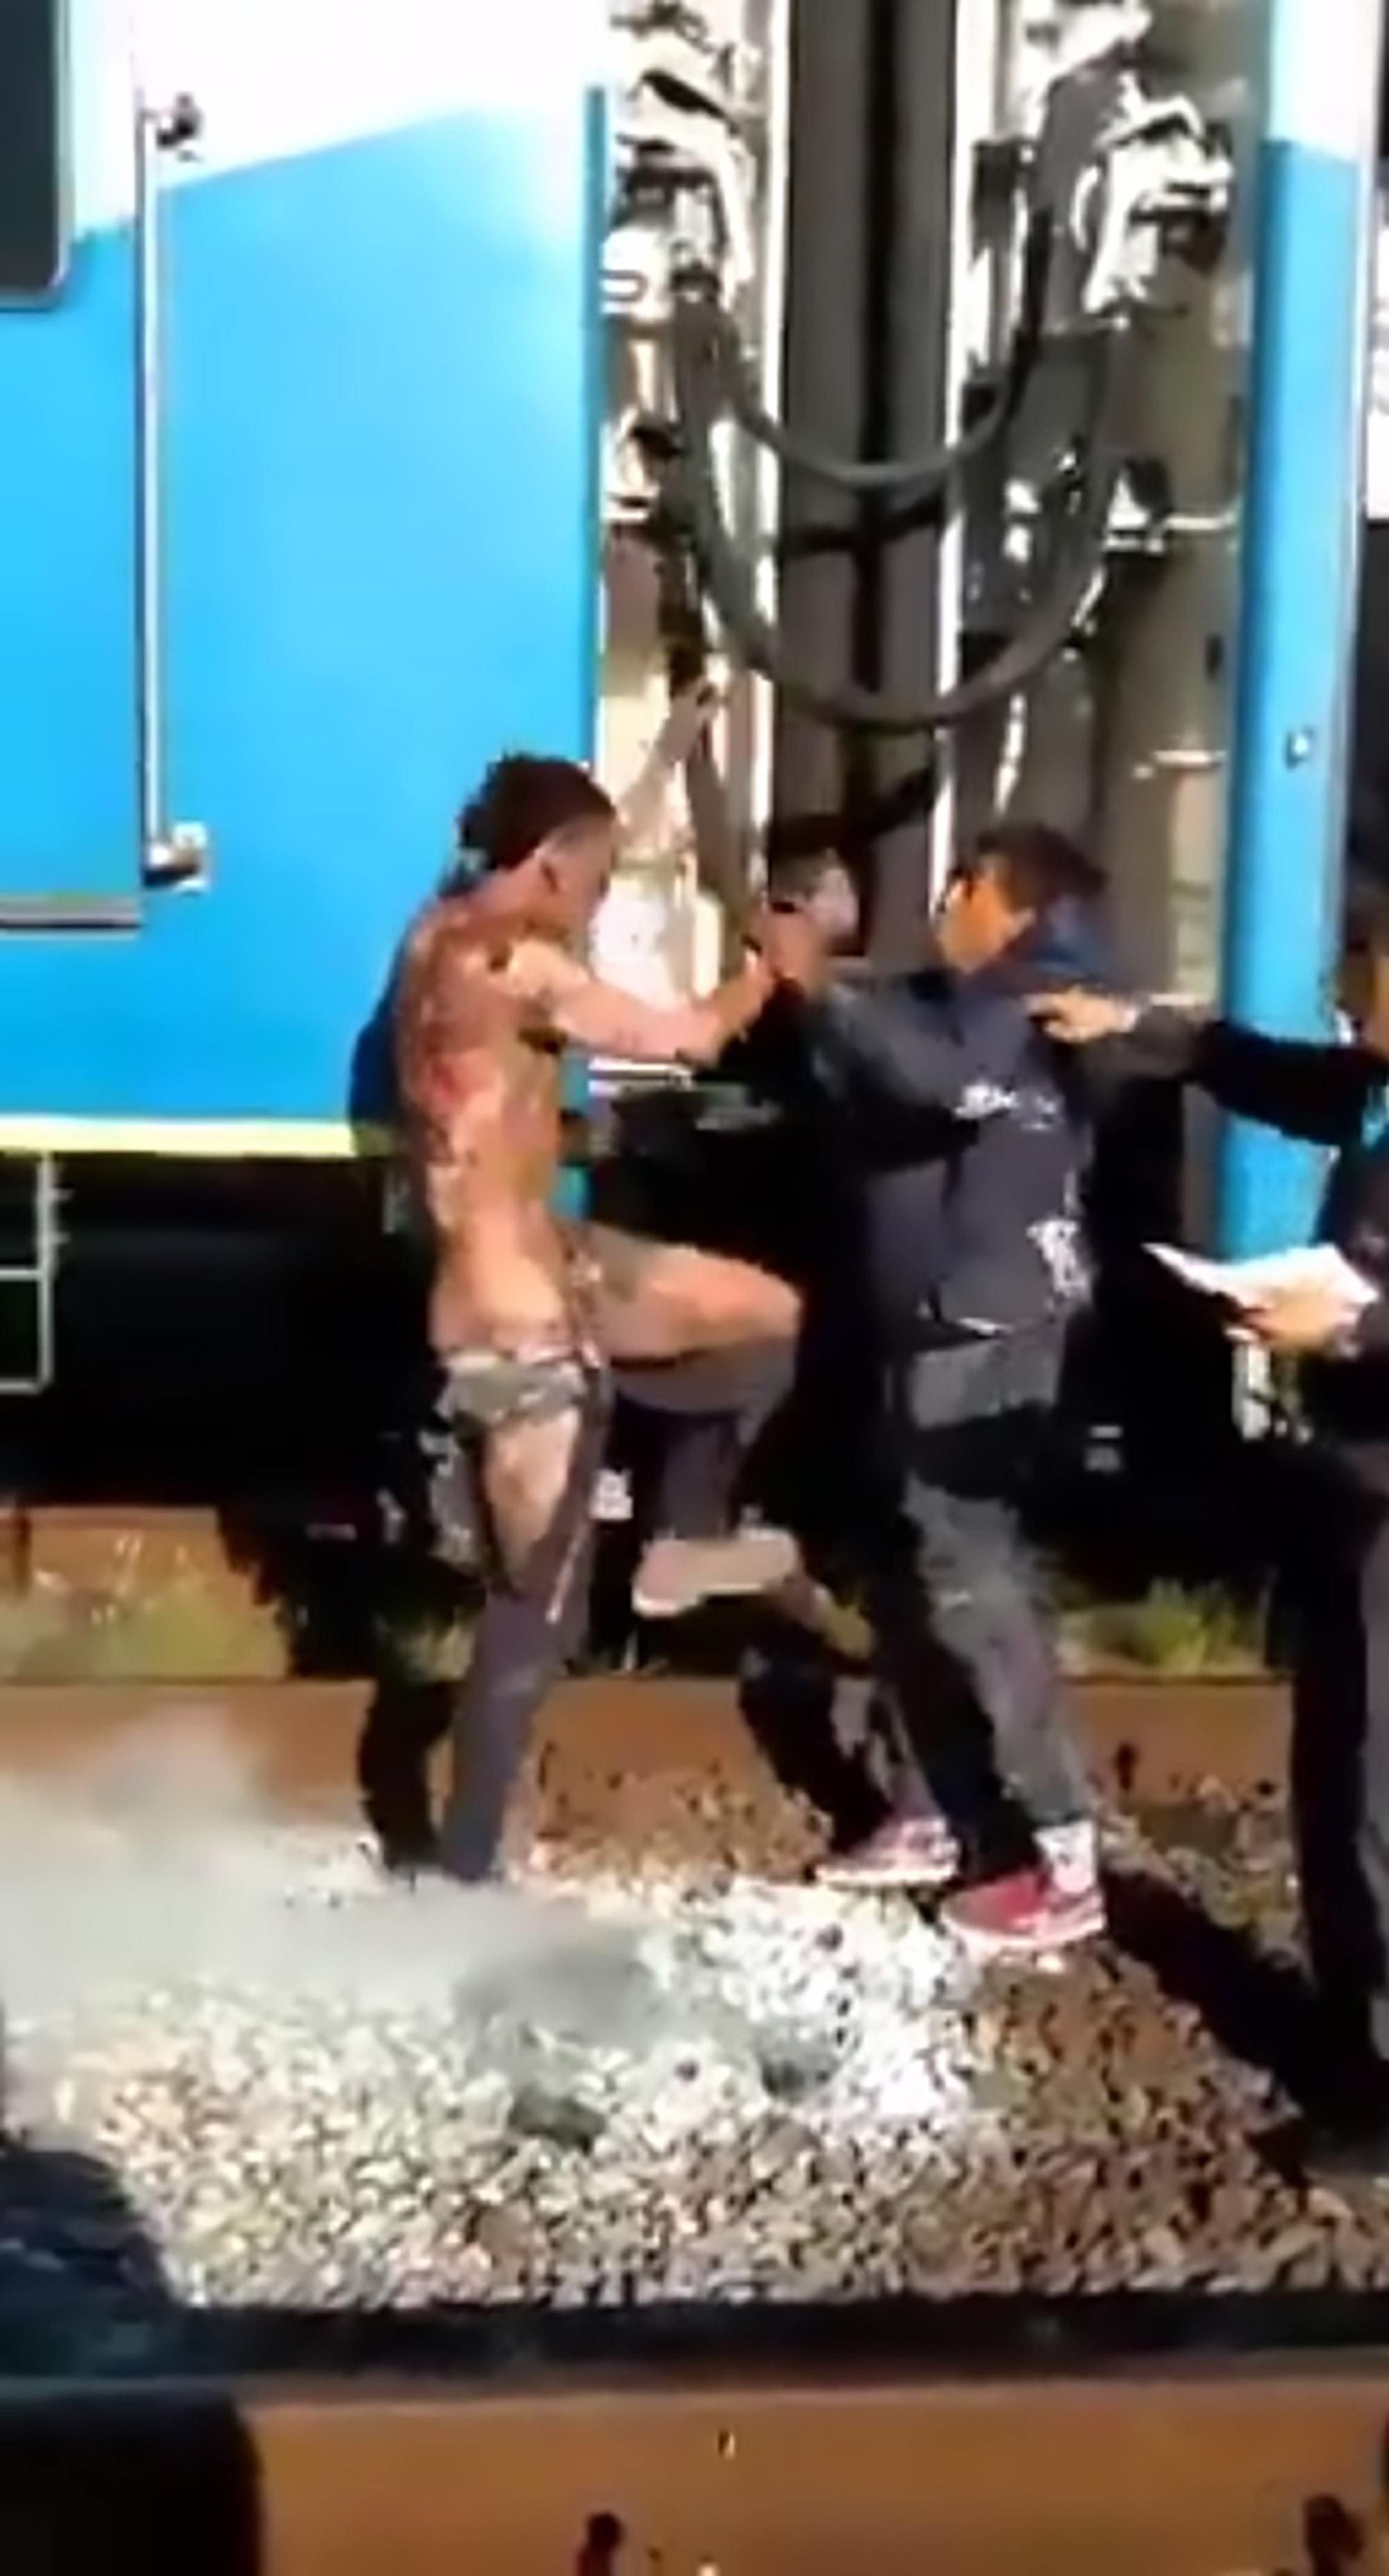 Read more about the article Electric Shock Burns Off Clothes Of Man On Train Roof